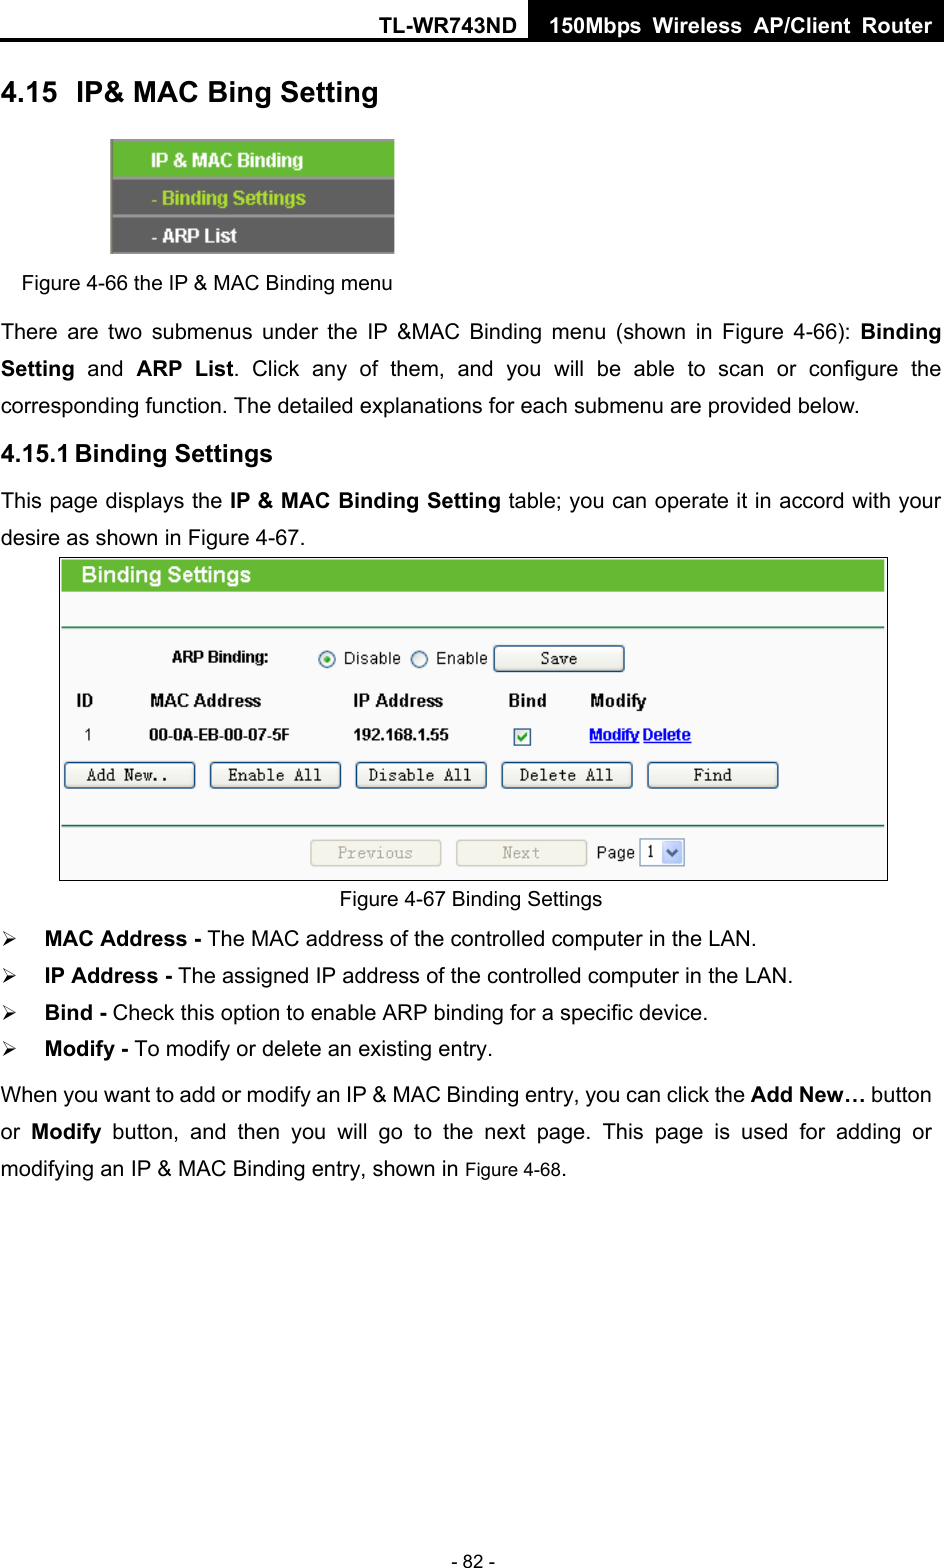 TL-WR743ND 150Mbps Wireless AP/Client Router - 82 - 4.15  IP&amp; MAC Bing Setting  Figure 4-66 the IP &amp; MAC Binding menu There are two submenus under the IP &amp;MAC Binding menu (shown in Figure 4-66):  Binding Setting  and ARP List. Click any of them, and you will be able to scan or configure the corresponding function. The detailed explanations for each submenu are provided below. 4.15.1 Binding Settings This page displays the IP &amp; MAC Binding Setting table; you can operate it in accord with your desire as shown in Figure 4-67.   Figure 4-67 Binding Settings ¾ MAC Address - The MAC address of the controlled computer in the LAN.   ¾ IP Address - The assigned IP address of the controlled computer in the LAN.   ¾ Bind - Check this option to enable ARP binding for a specific device.   ¾ Modify - To modify or delete an existing entry.   When you want to add or modify an IP &amp; MAC Binding entry, you can click the Add New… button or  Modify button, and then you will go to the next page. This page is used for adding or modifying an IP &amp; MAC Binding entry, shown in Figure 4-68.   